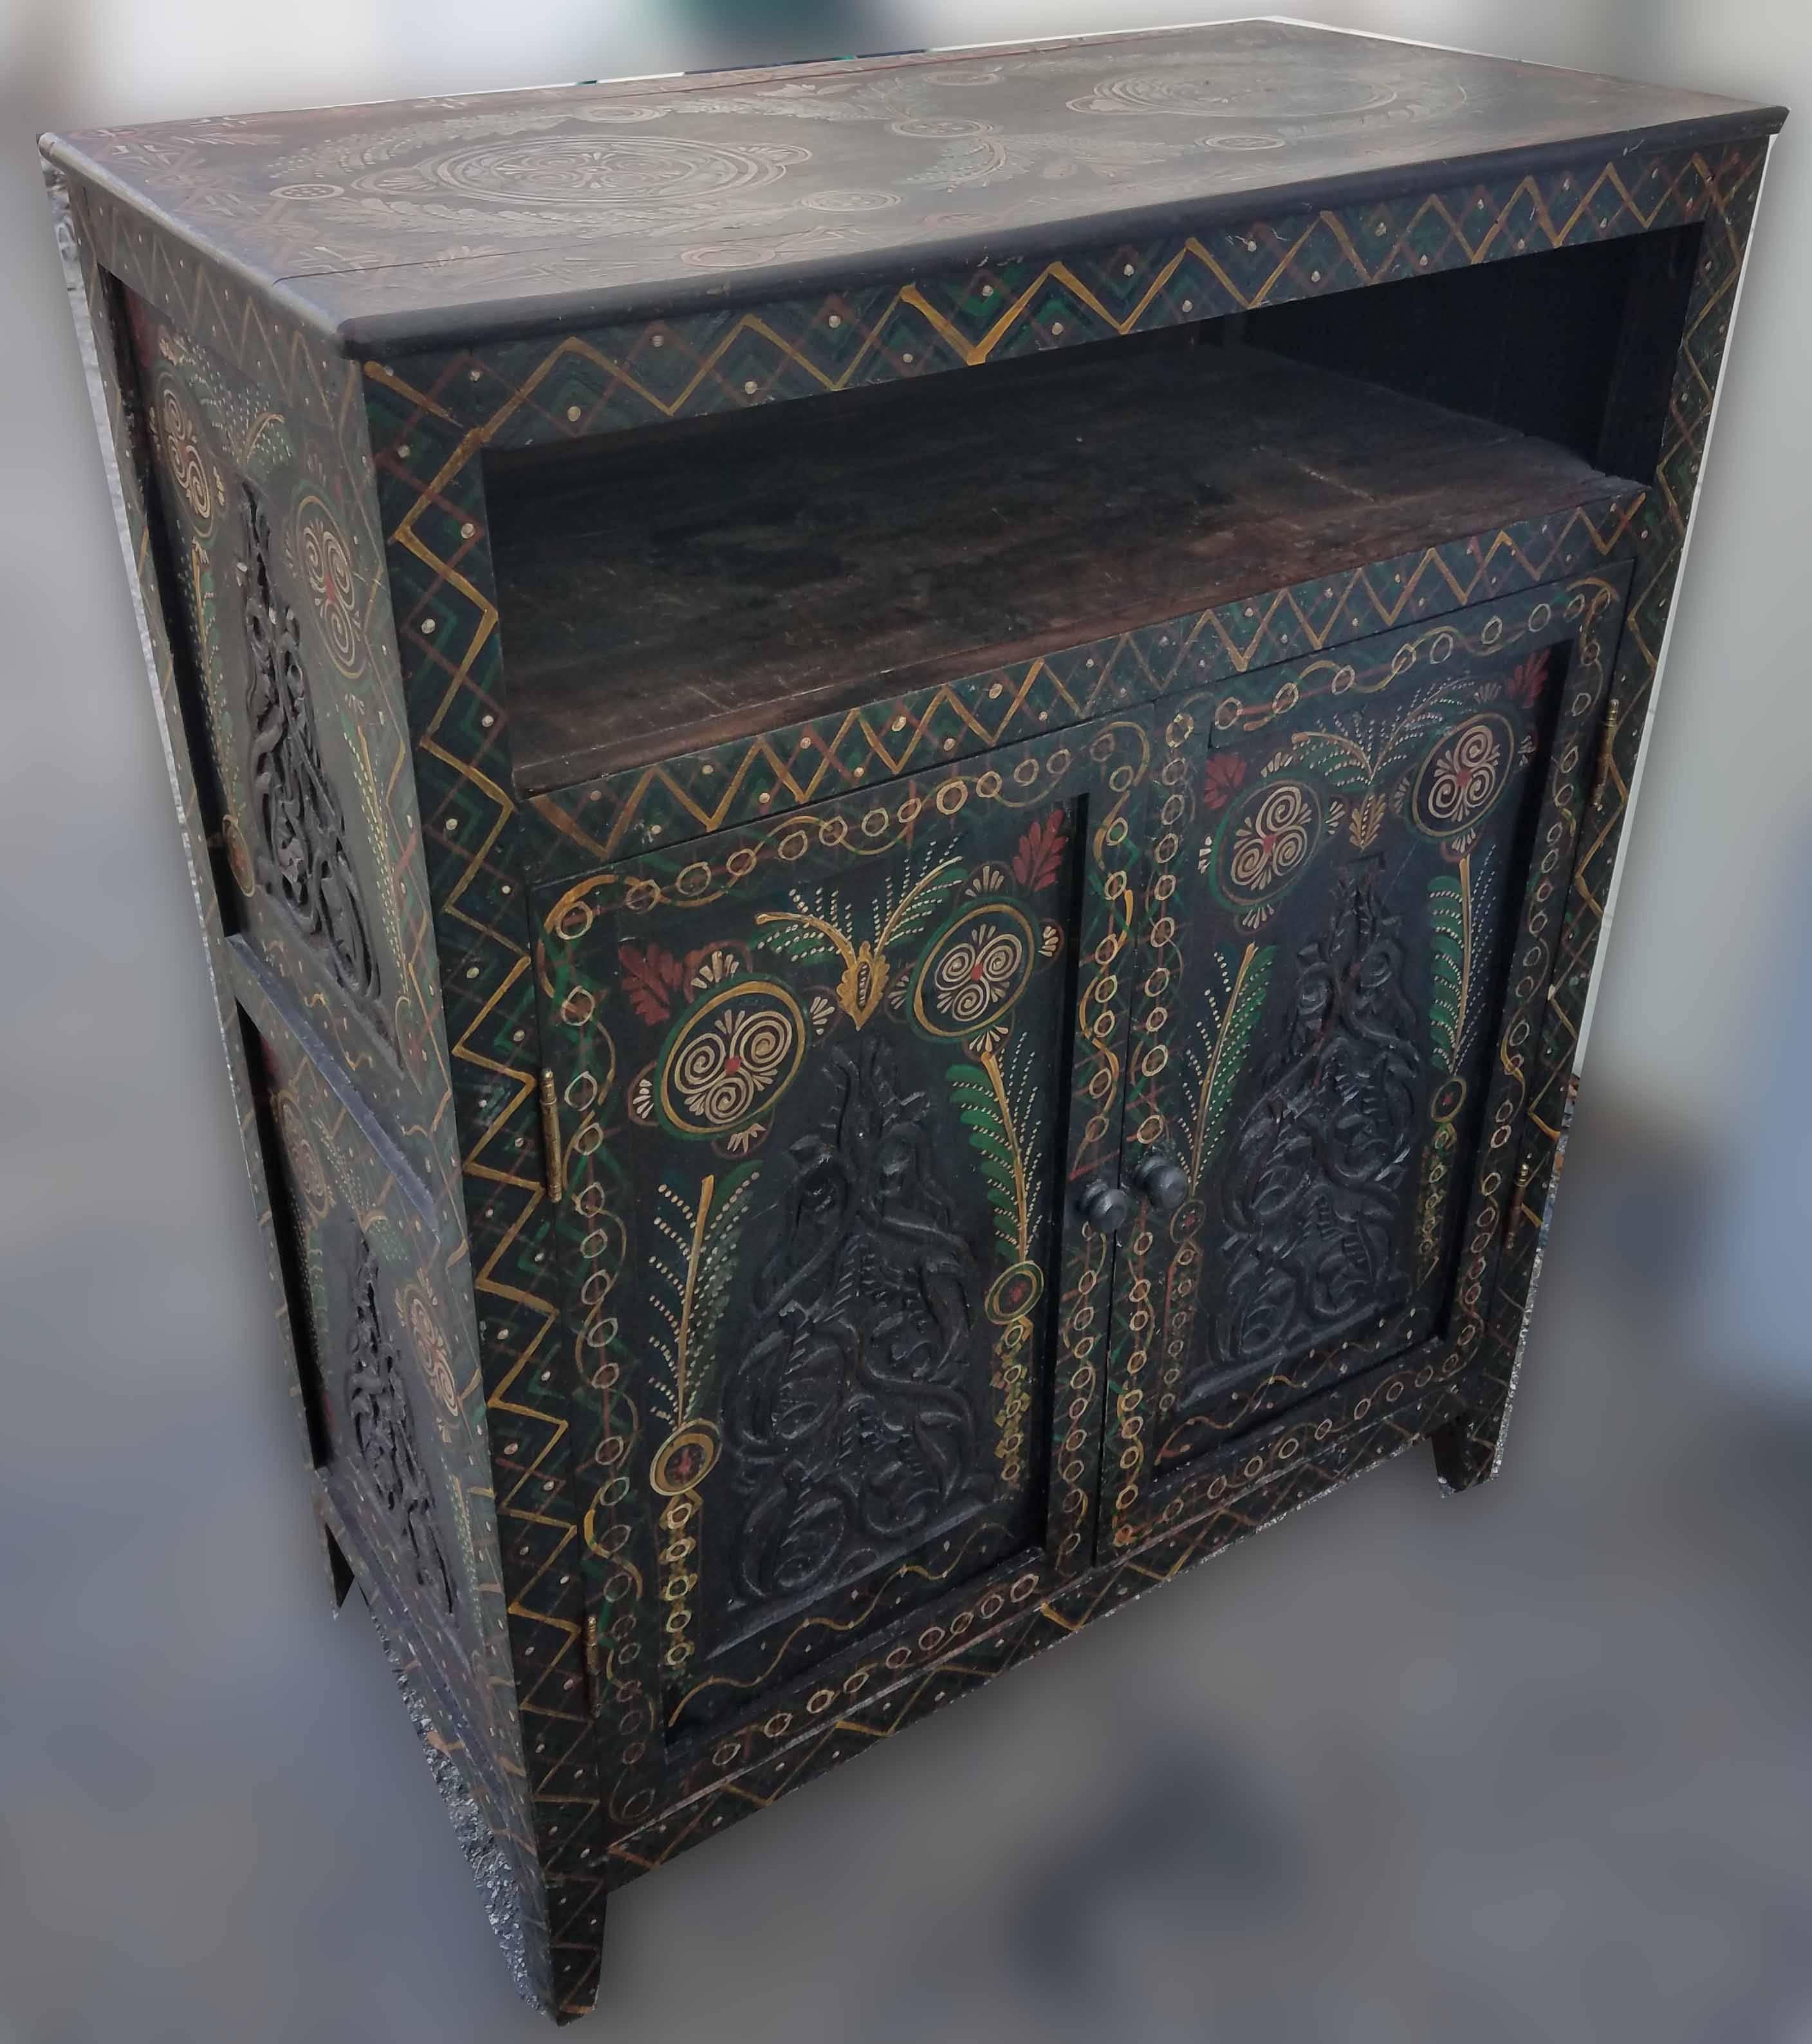 Aged brown handmade Moroccan cedar wooden cabinet measuring 38” in height, 30” in width, and 16” in depth, and featuring two inside shelves with double doors and one open shelf above. Plenty of storage. Lots of carvings throughout. Can work as a